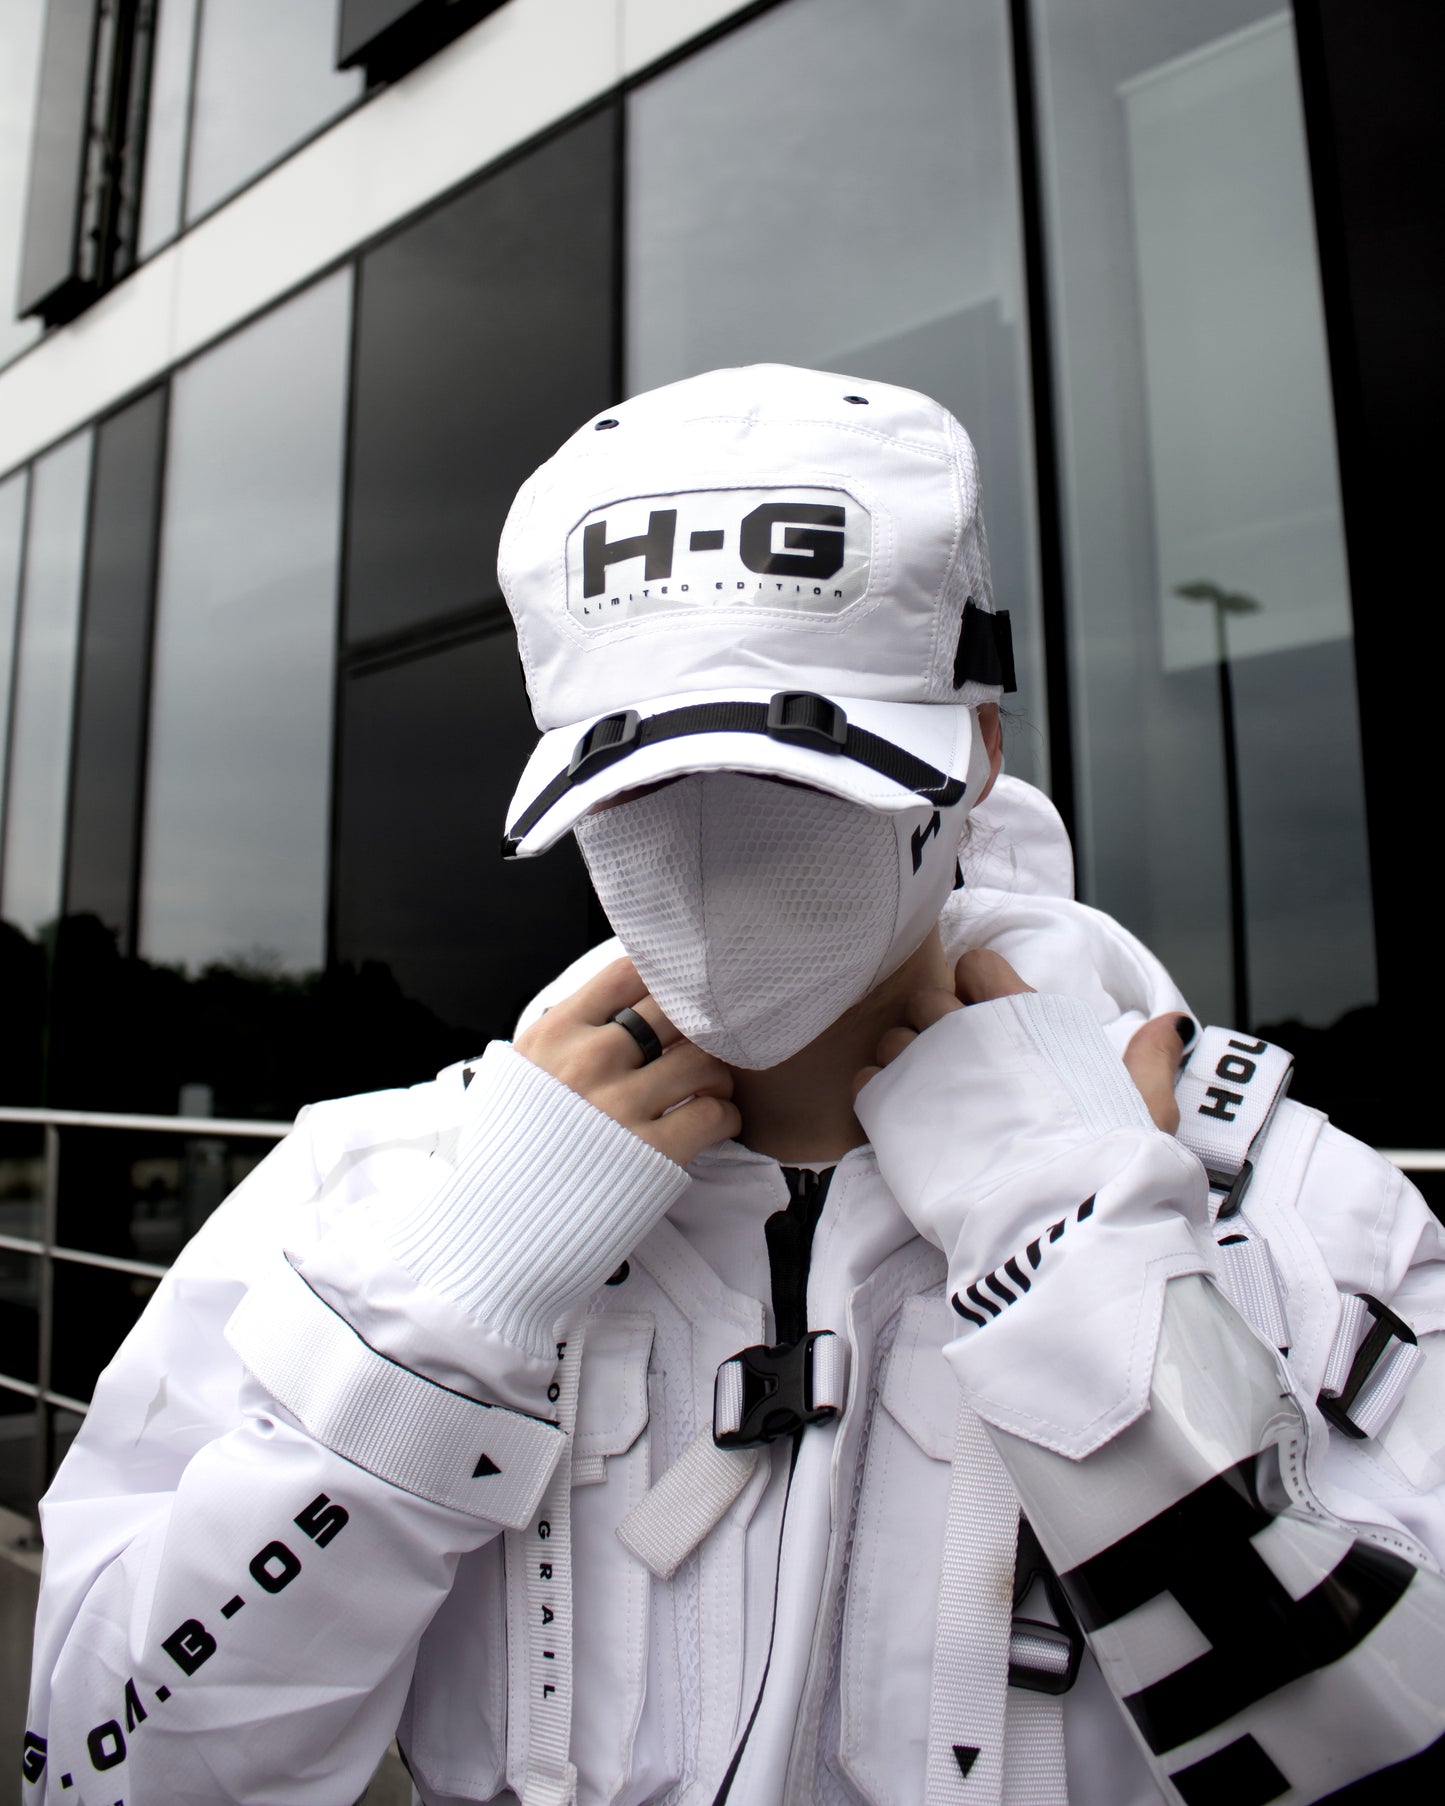 H-G C.04/WHT(SOLD OUT!)